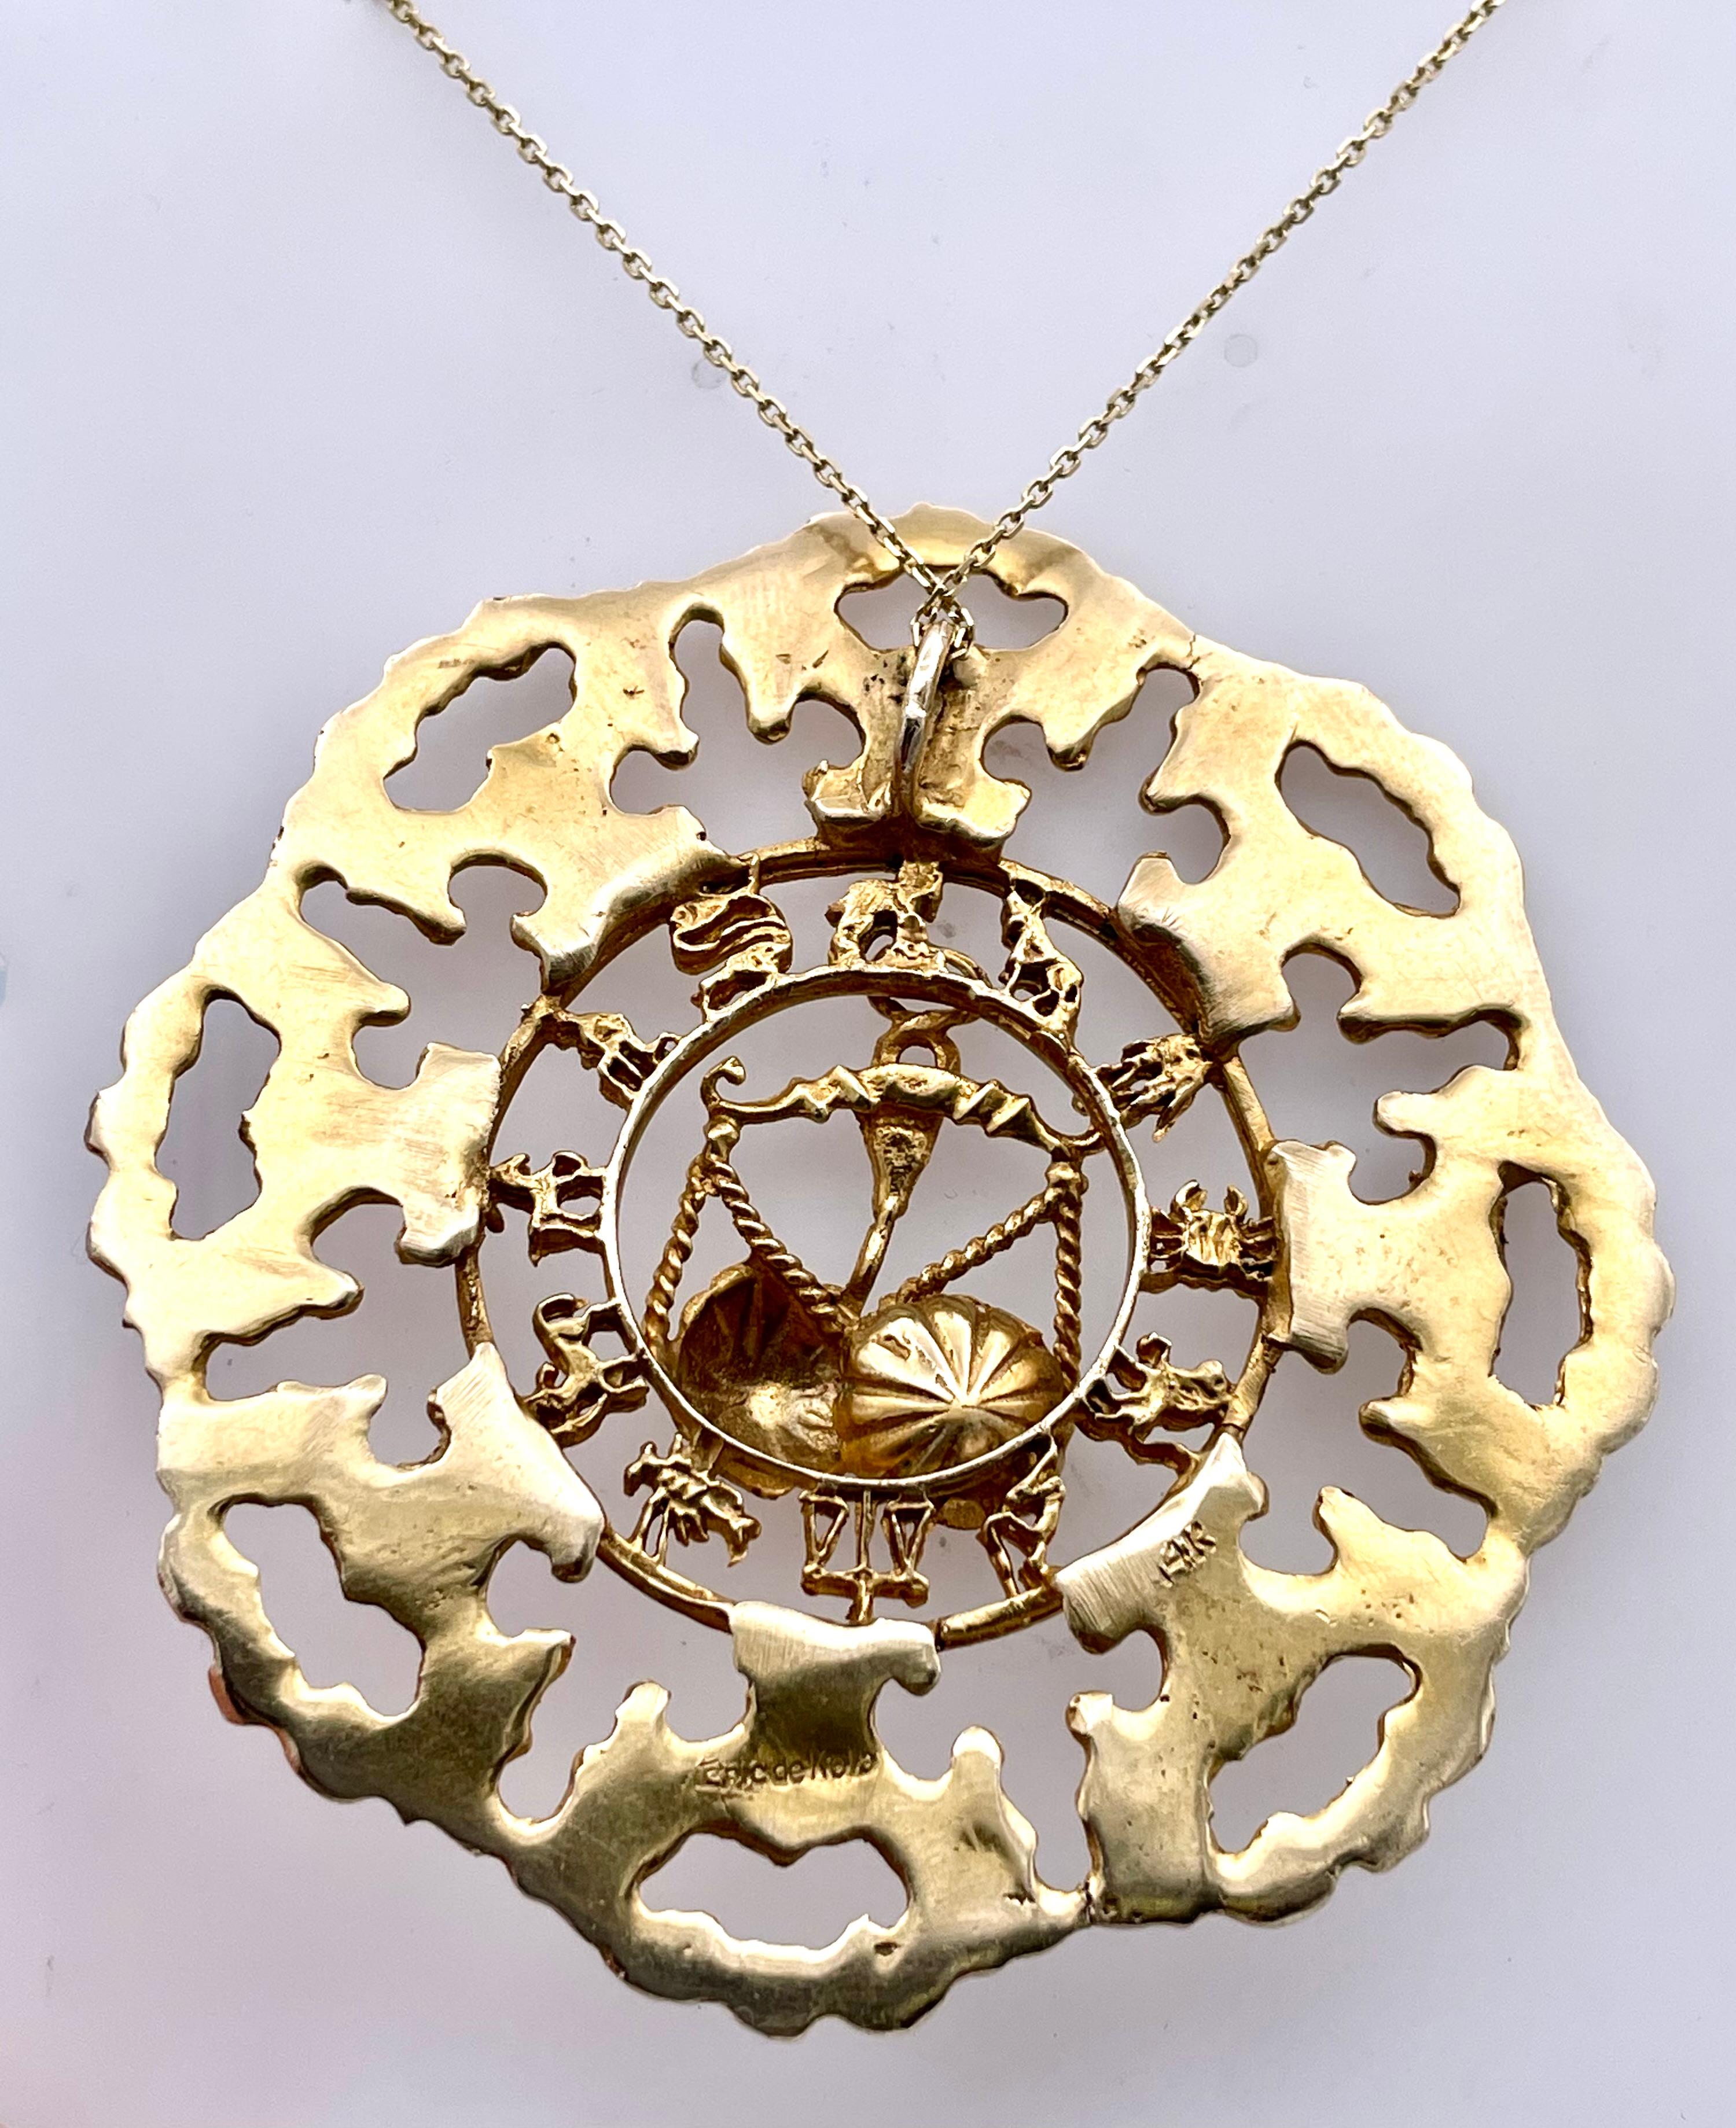 Extra large round pendant with a scalloped border.  The outer border is an open-work embellished design, framing the central depiction of the twelve astrological signs.   Made and signed by Eric de Kolb, the renowned Austrian Surrealist artist.  3